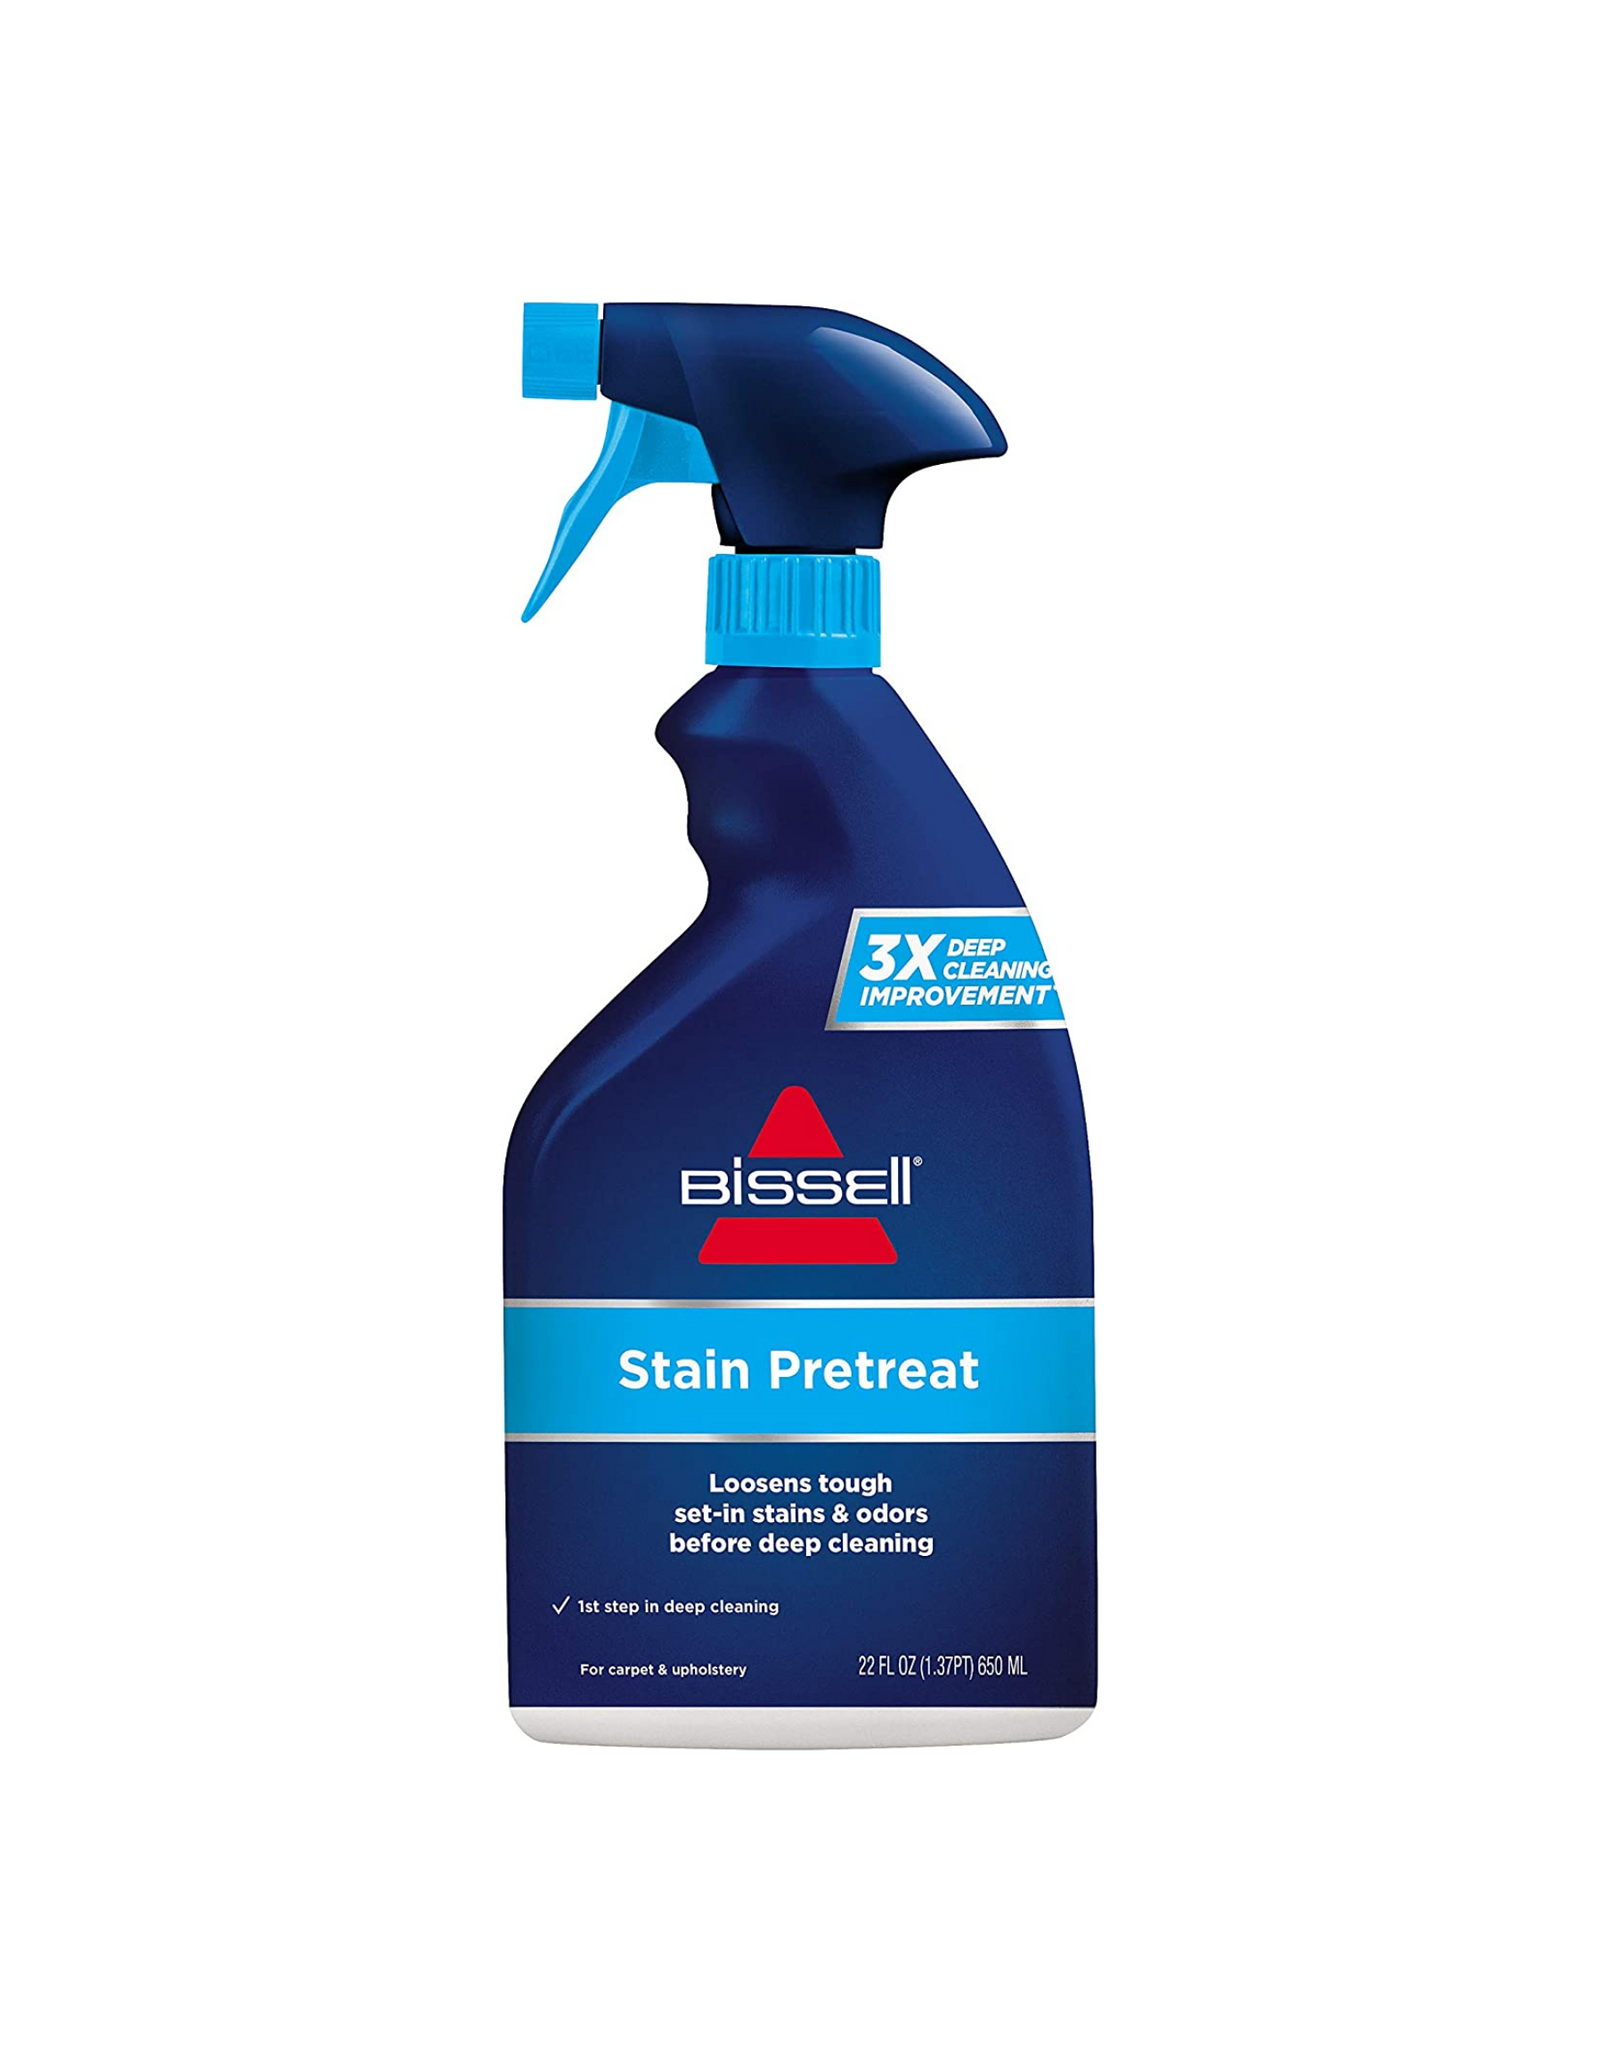 BISSELL Stain Pretreat for Carpet & Upholstery, 22 fl oz (Pack of 1)